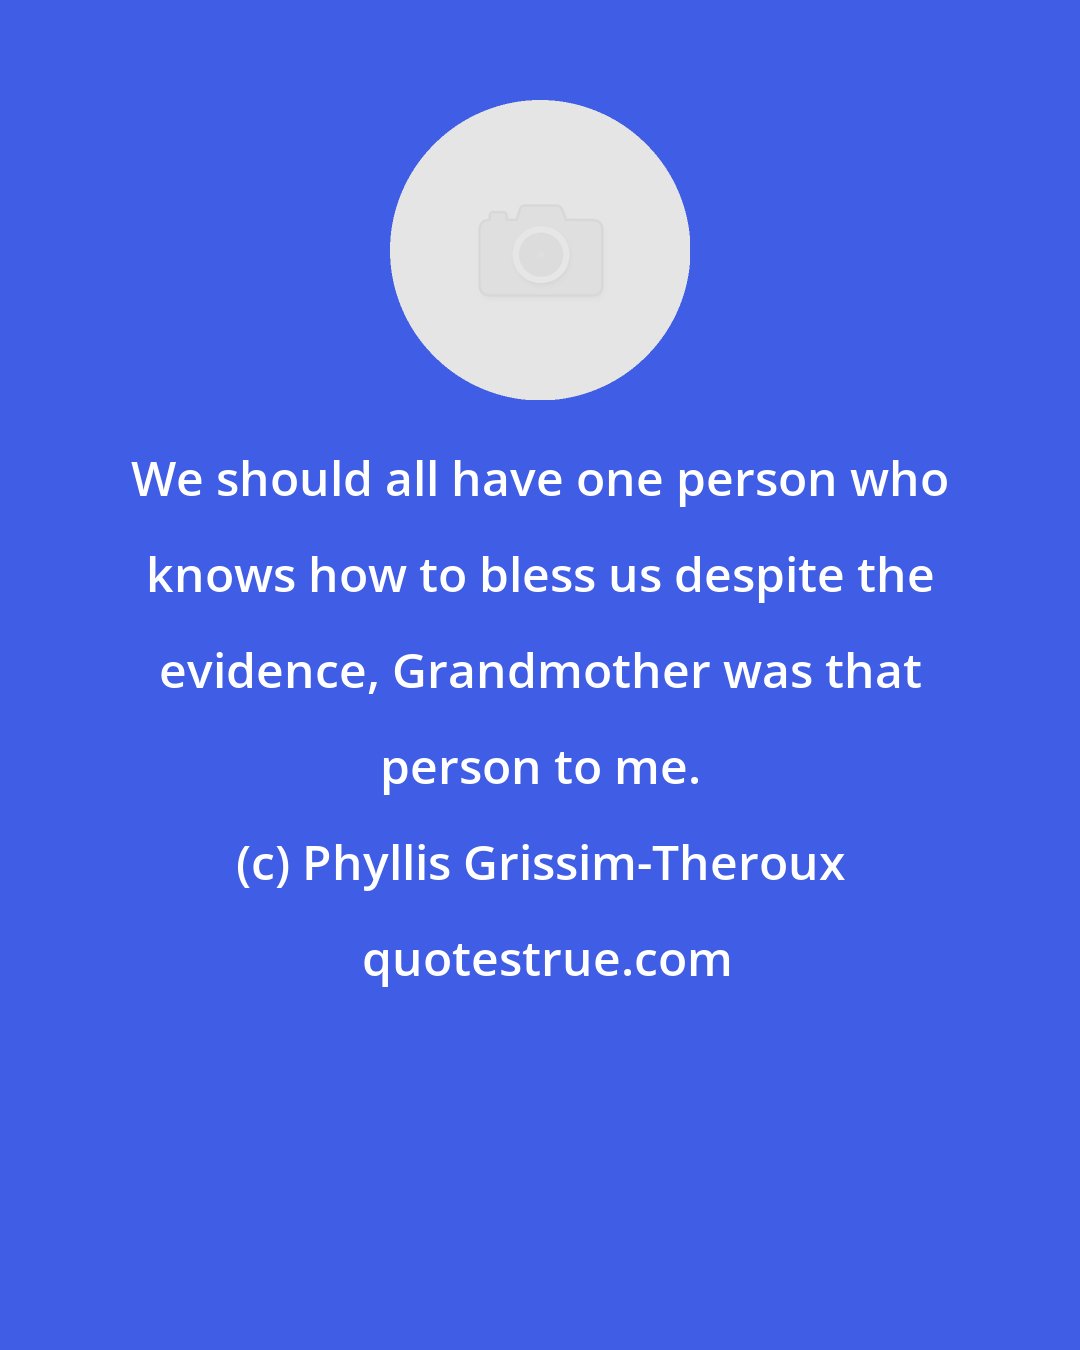 Phyllis Grissim-Theroux: We should all have one person who knows how to bless us despite the evidence, Grandmother was that person to me.